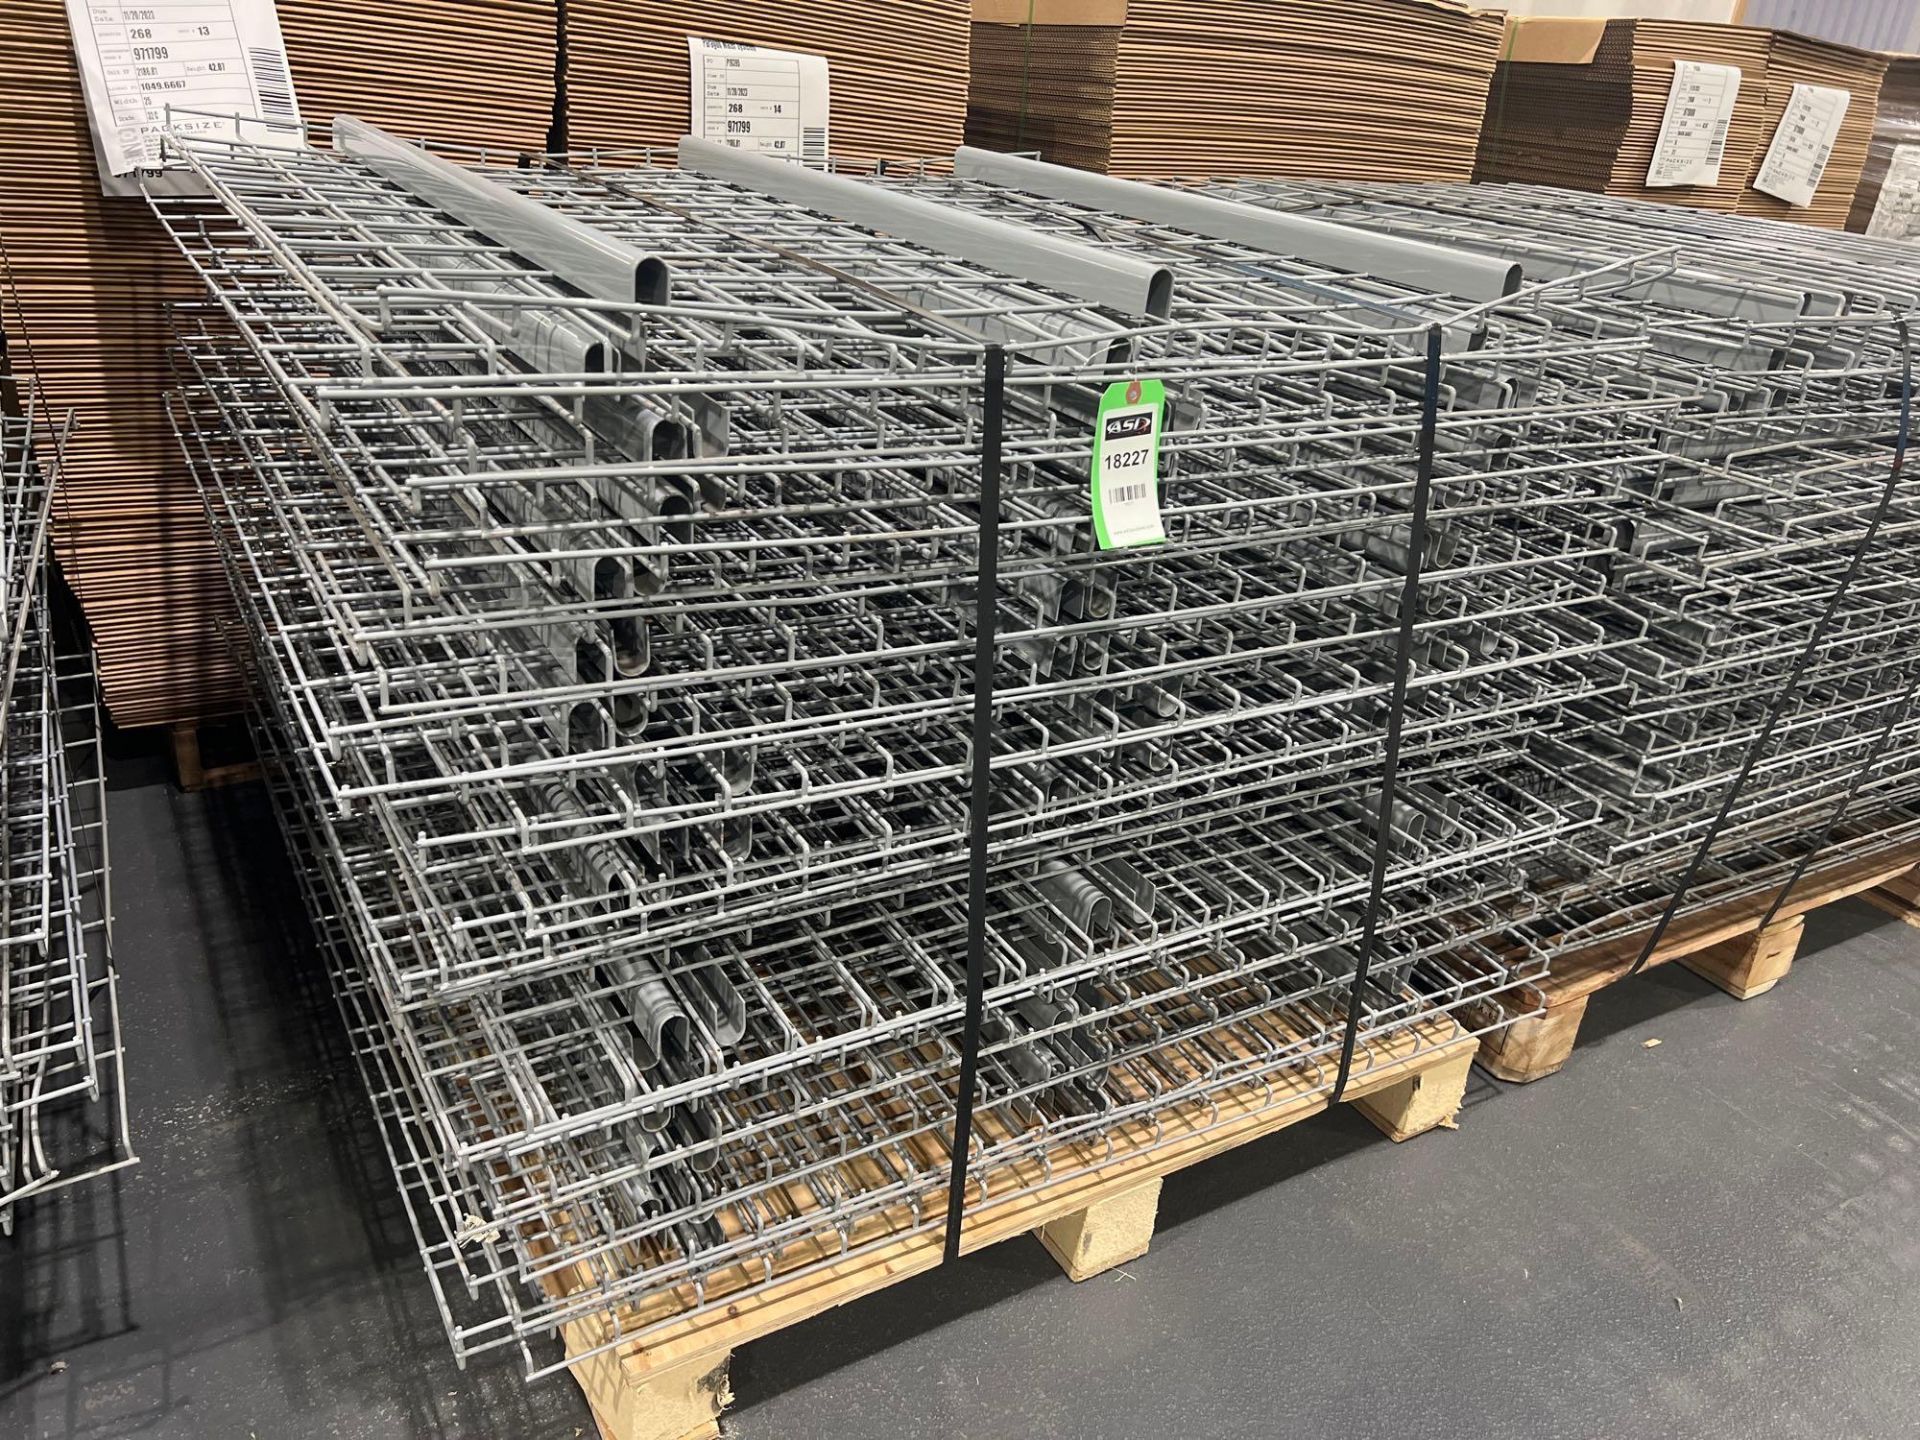 PALLET OF APPROX. 34 WIRE GRATES FOR PALLET RACKING, APPROX. DIMENSIONS 43" X 45" - Image 4 of 7